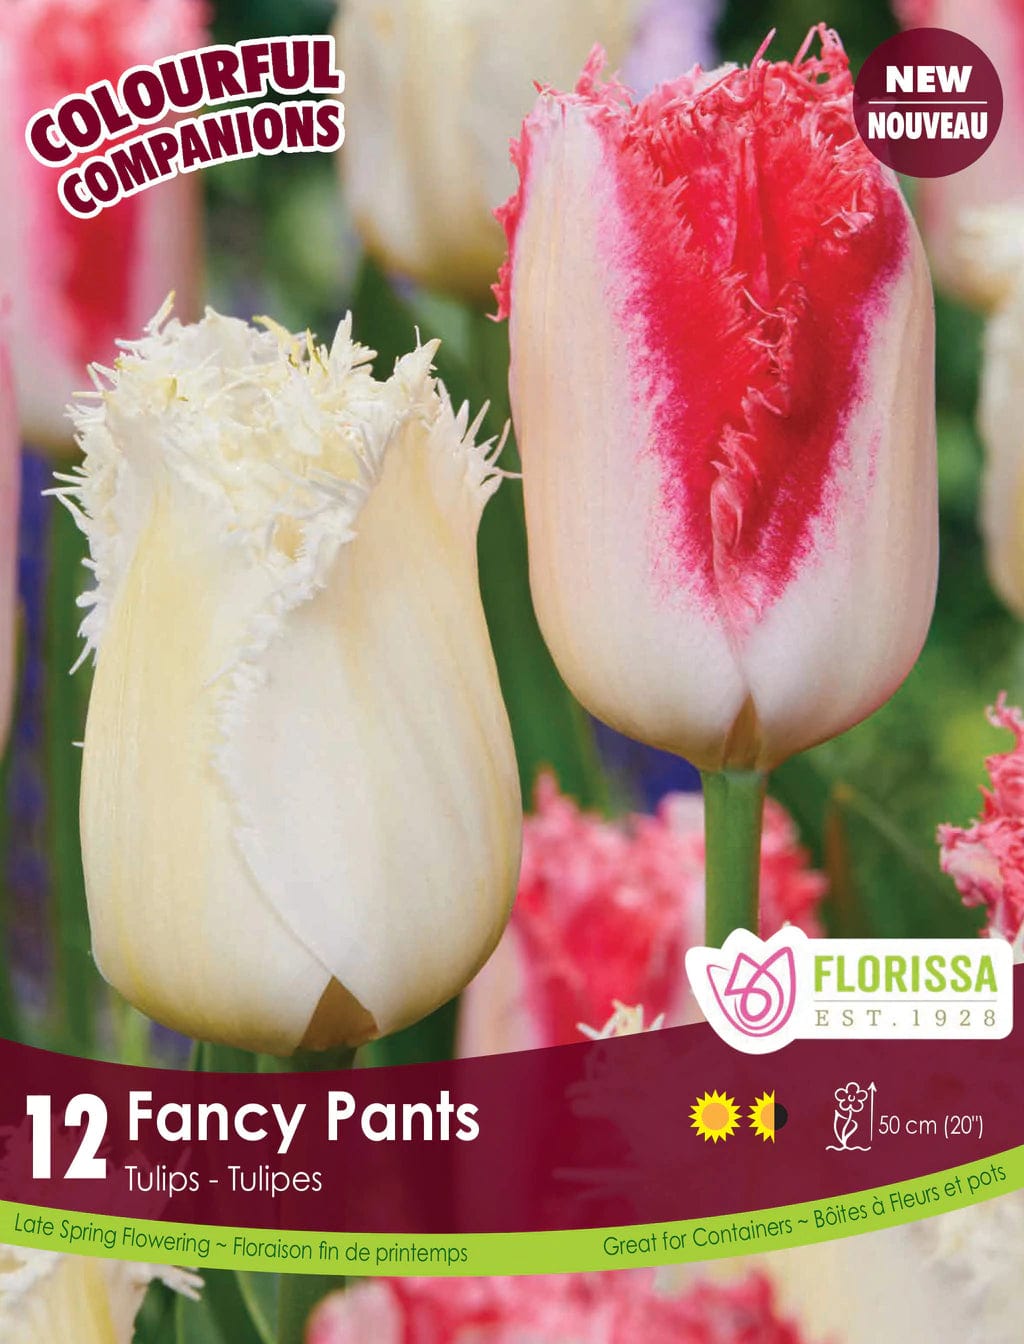 Tulips - Fancy Pants, Colourful Companions, 12 Pack